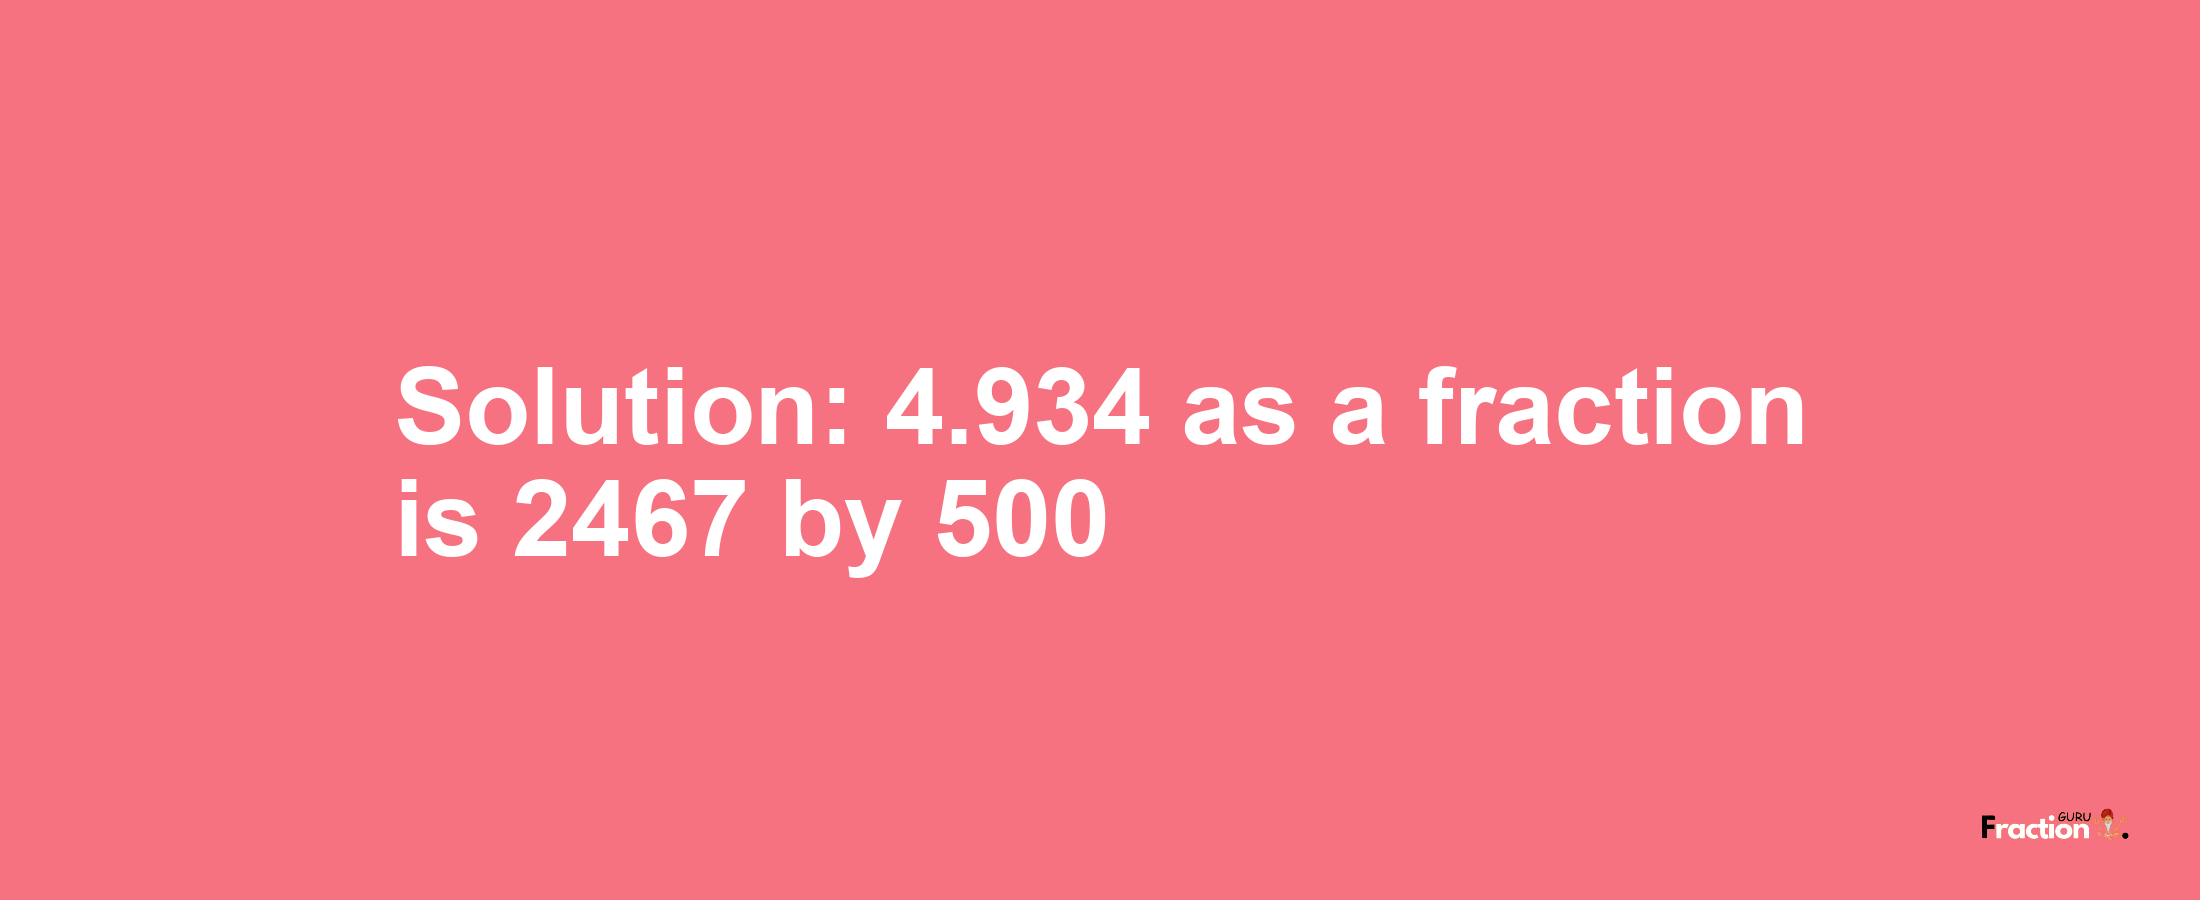 Solution:4.934 as a fraction is 2467/500